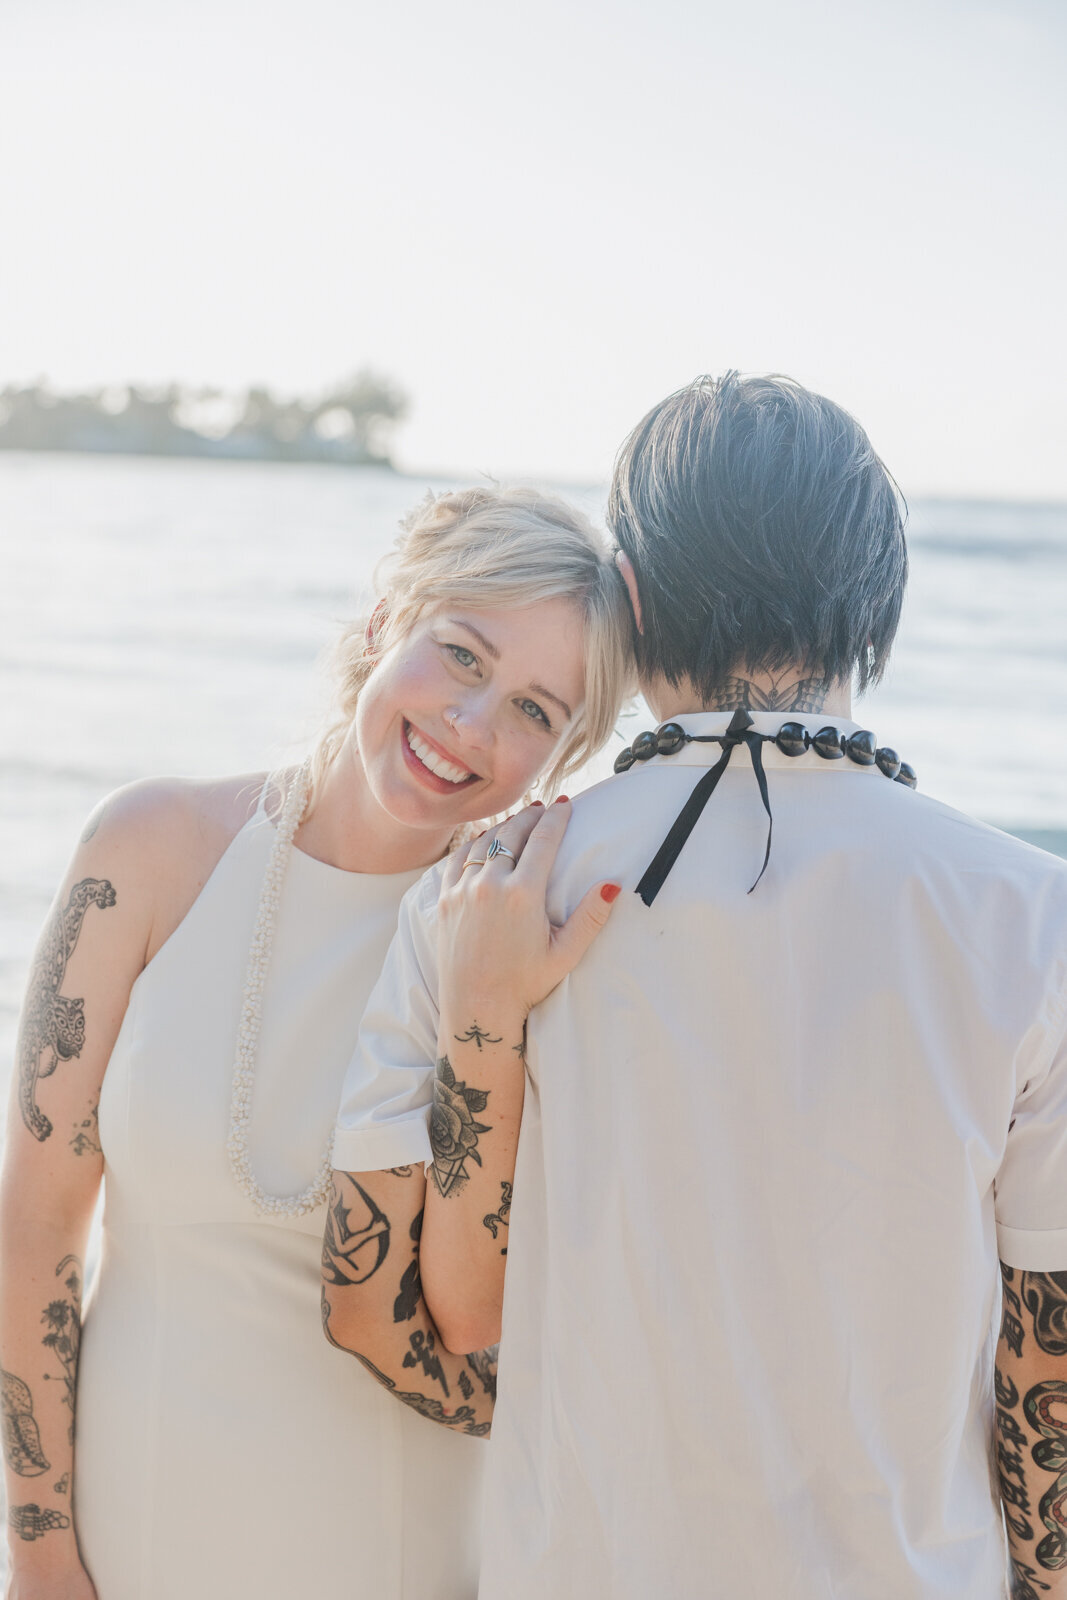 Cute and fun artist couple's wedding photography with us at Gentle Blossom Snaps